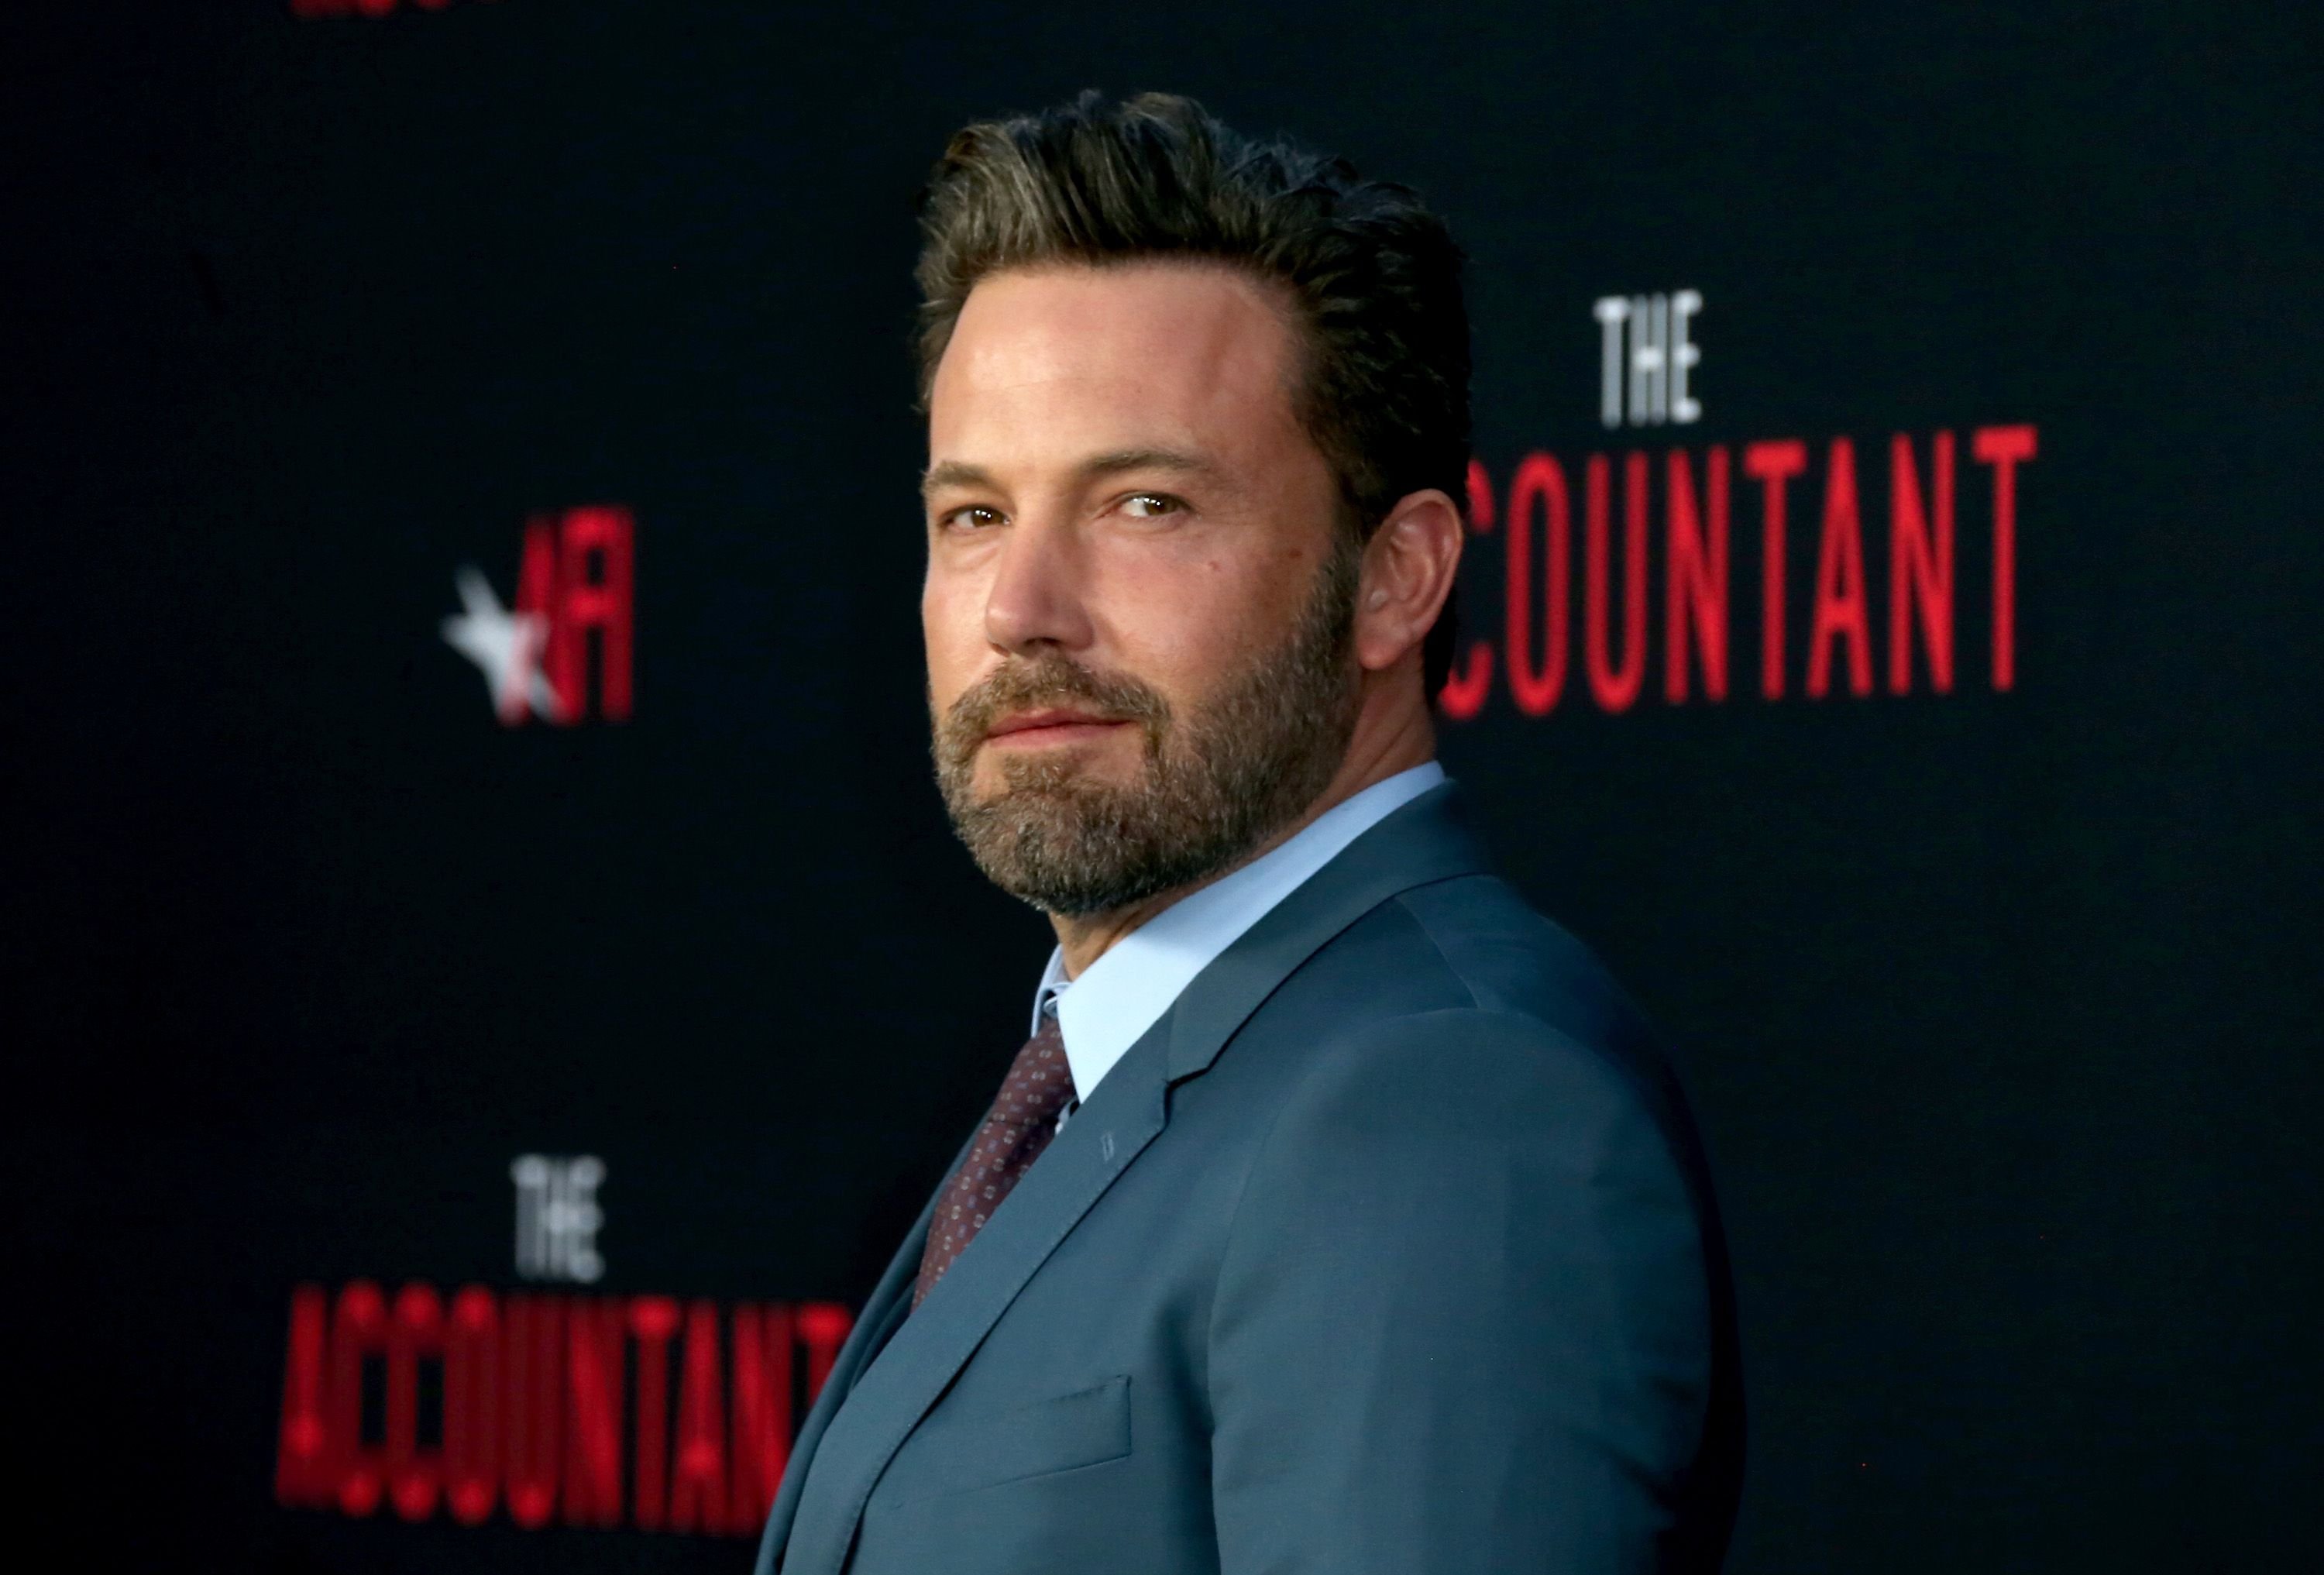 Ben Affleck at the premiere of "The Accountant" at TCL Chinese Theatre on October 10, 2016, in Hollywood, California. | Photo: Getty Images